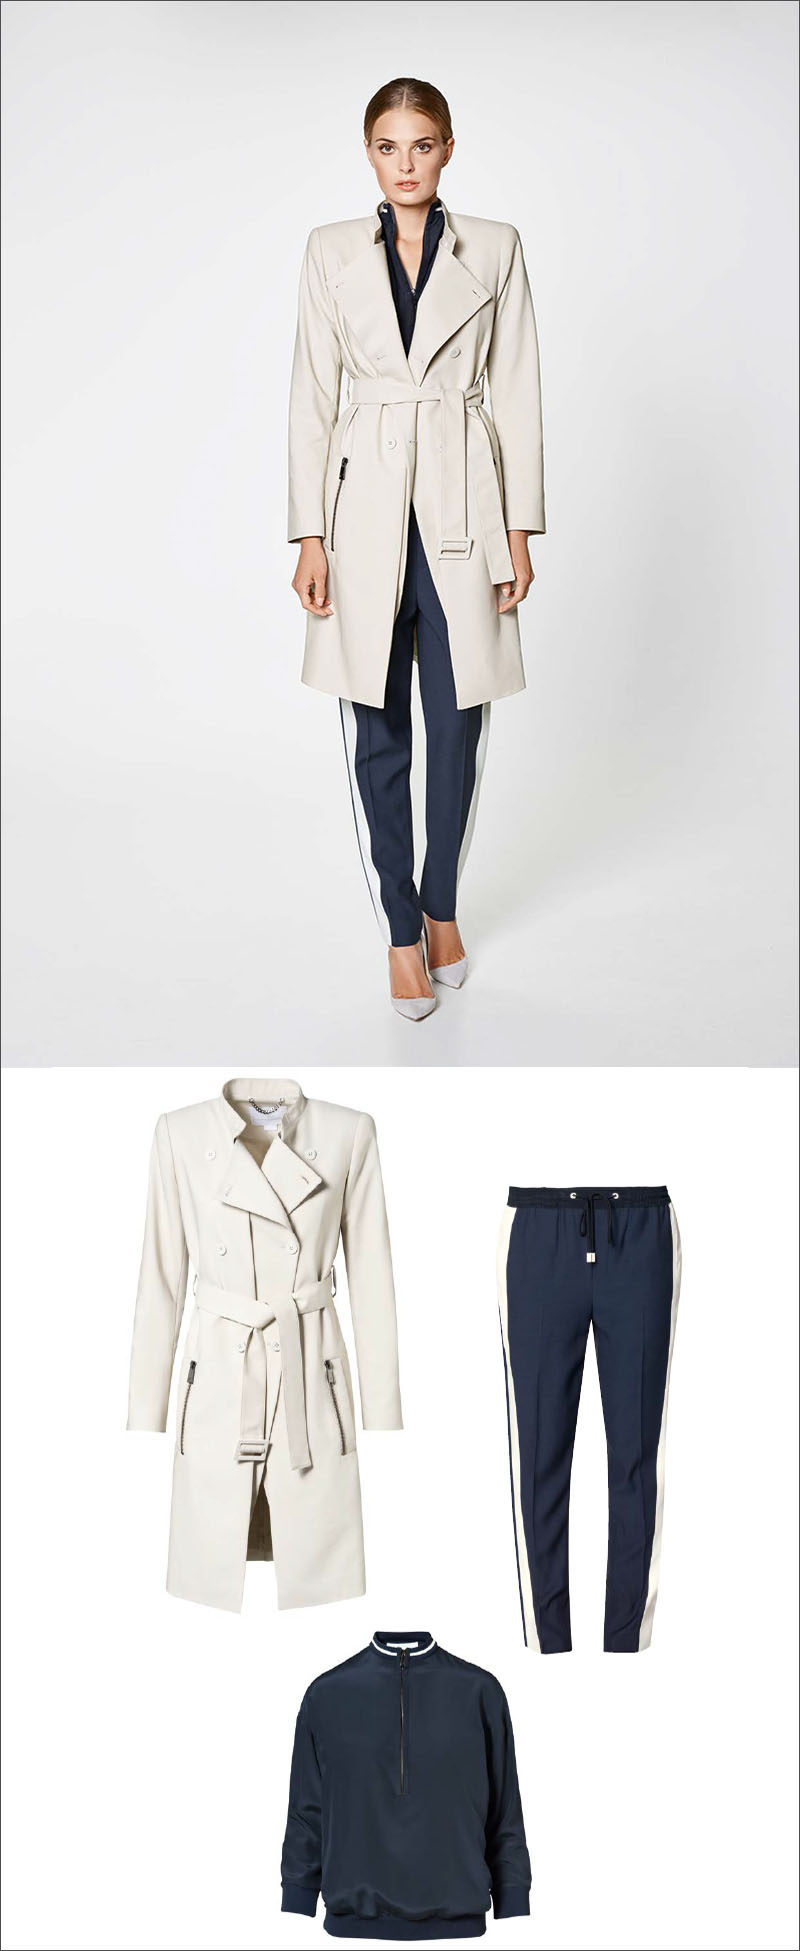 Women's Fashion Ideas - 12 Womens Outfits From Porsche Design's 2017 Spring/Summer Collection // This casual women's outfit, featuring a navy blouse and navy and white pants, has been dressed up with with a double breasted trench coat and pumps.